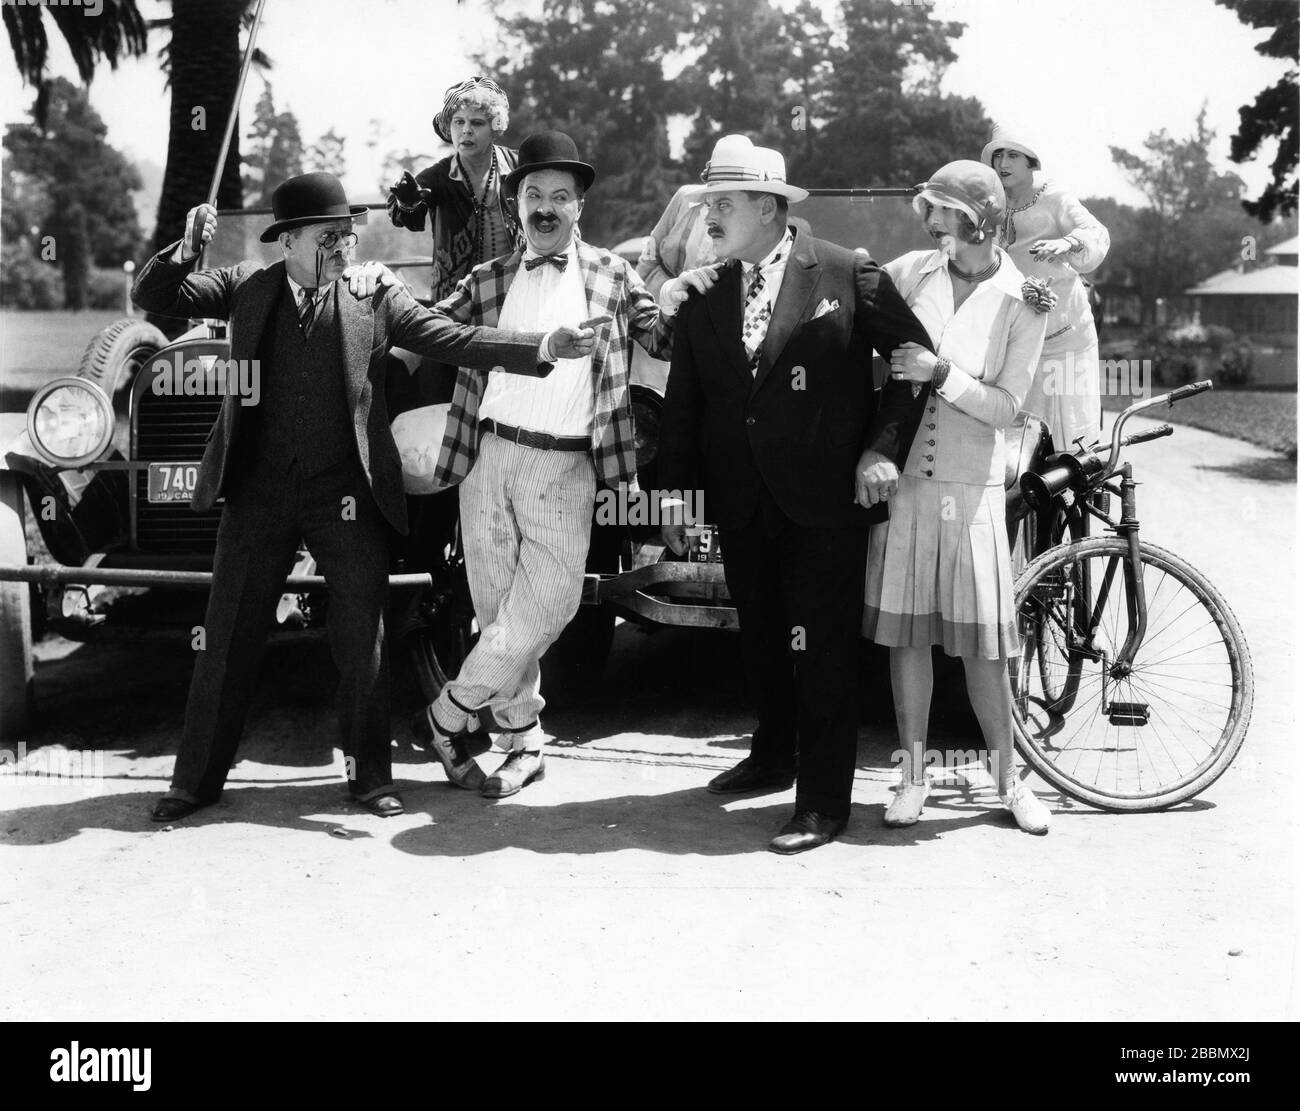 DOT FARLEY BILLY BEVAN VERNON DENT and CAROLE LOMBARD in THE BICYCLE FLIRT 1928 director HARRY EDWARDS Silent Comedy Short Mack Sennett Comedies / Pathe Exchange Stock Photo